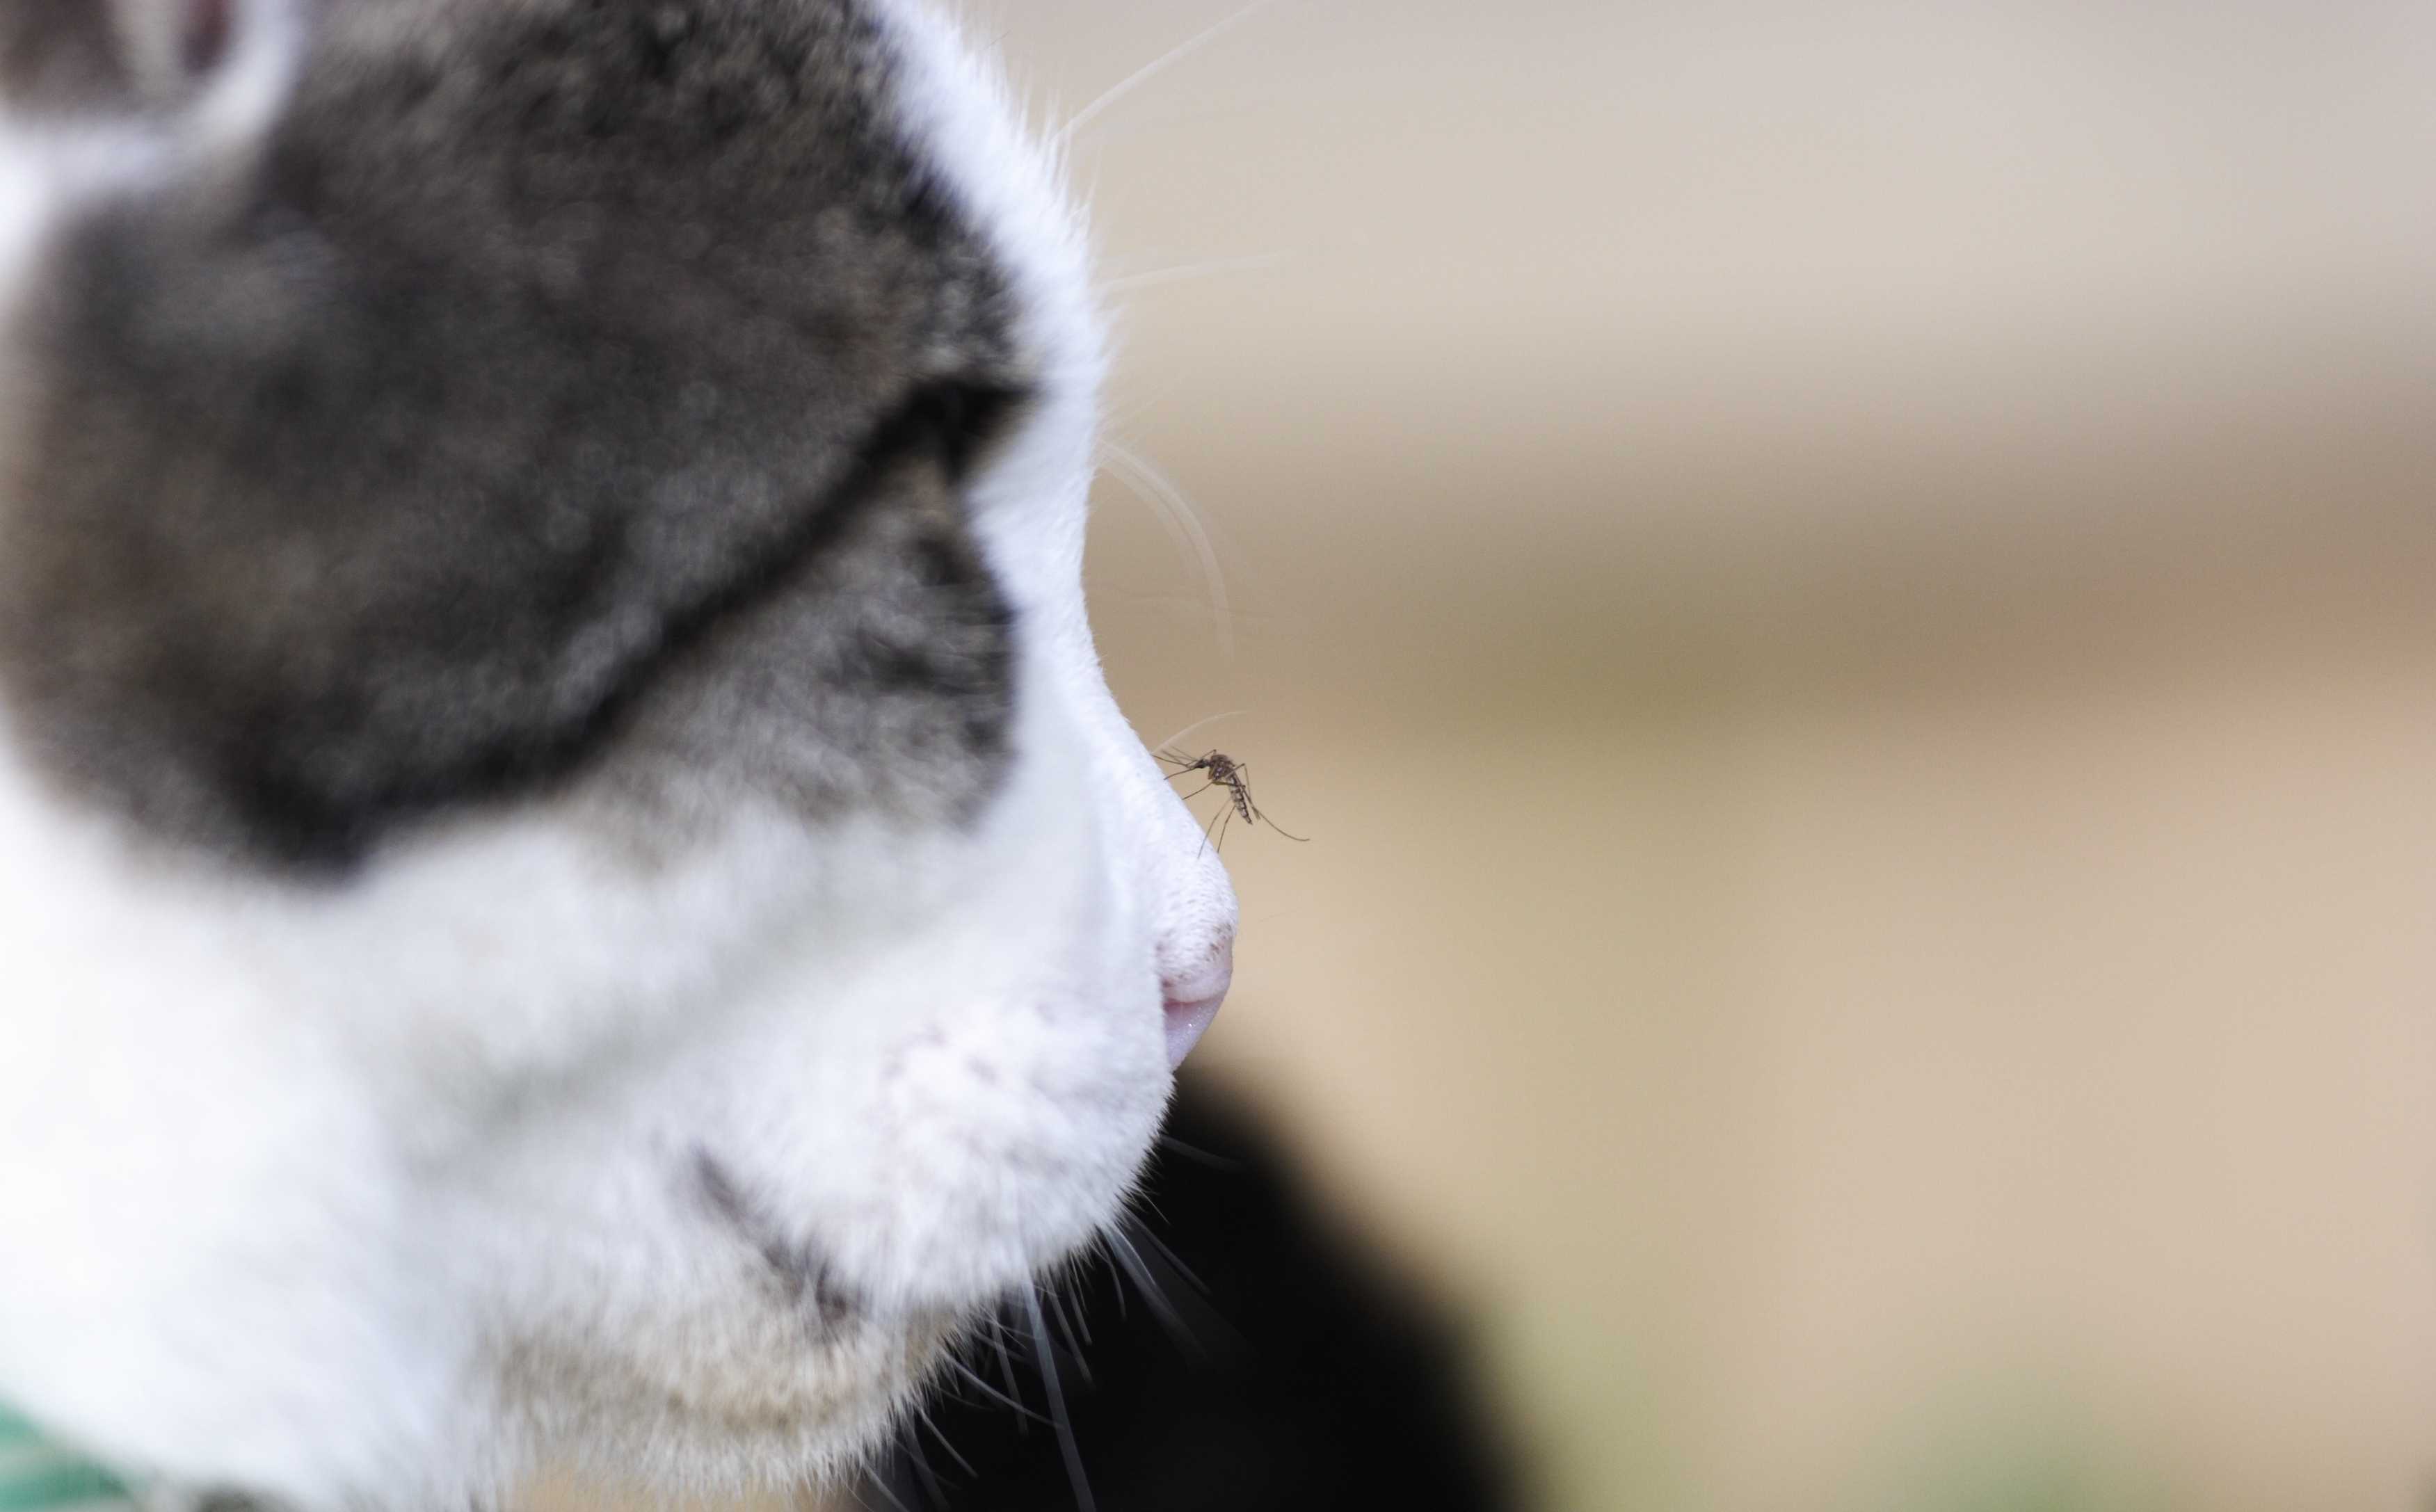 Mosquito on cat's nose